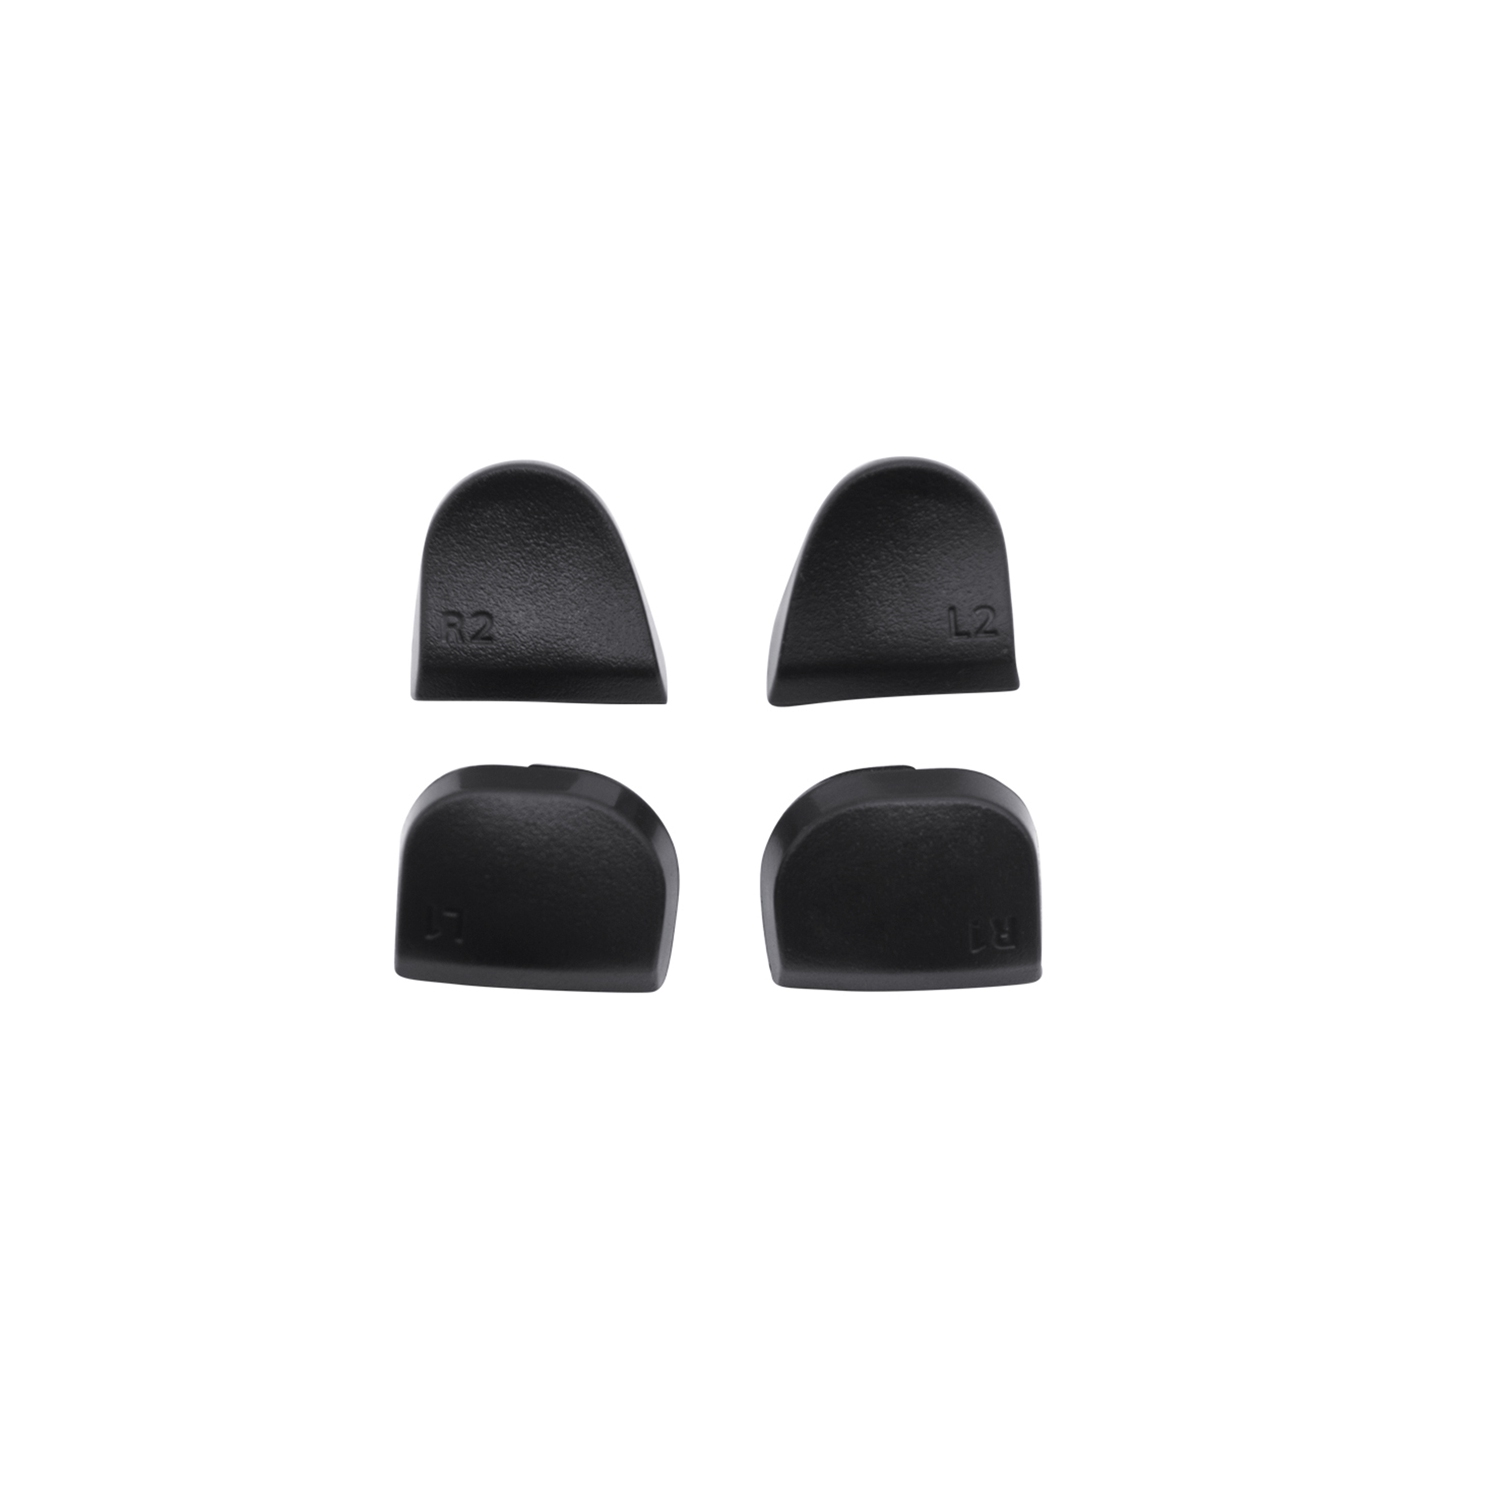 Replacement L1 / L2 / R1 / R2 Button Set For Sony PlayStation 5 (Sony PS5) Controller - Black